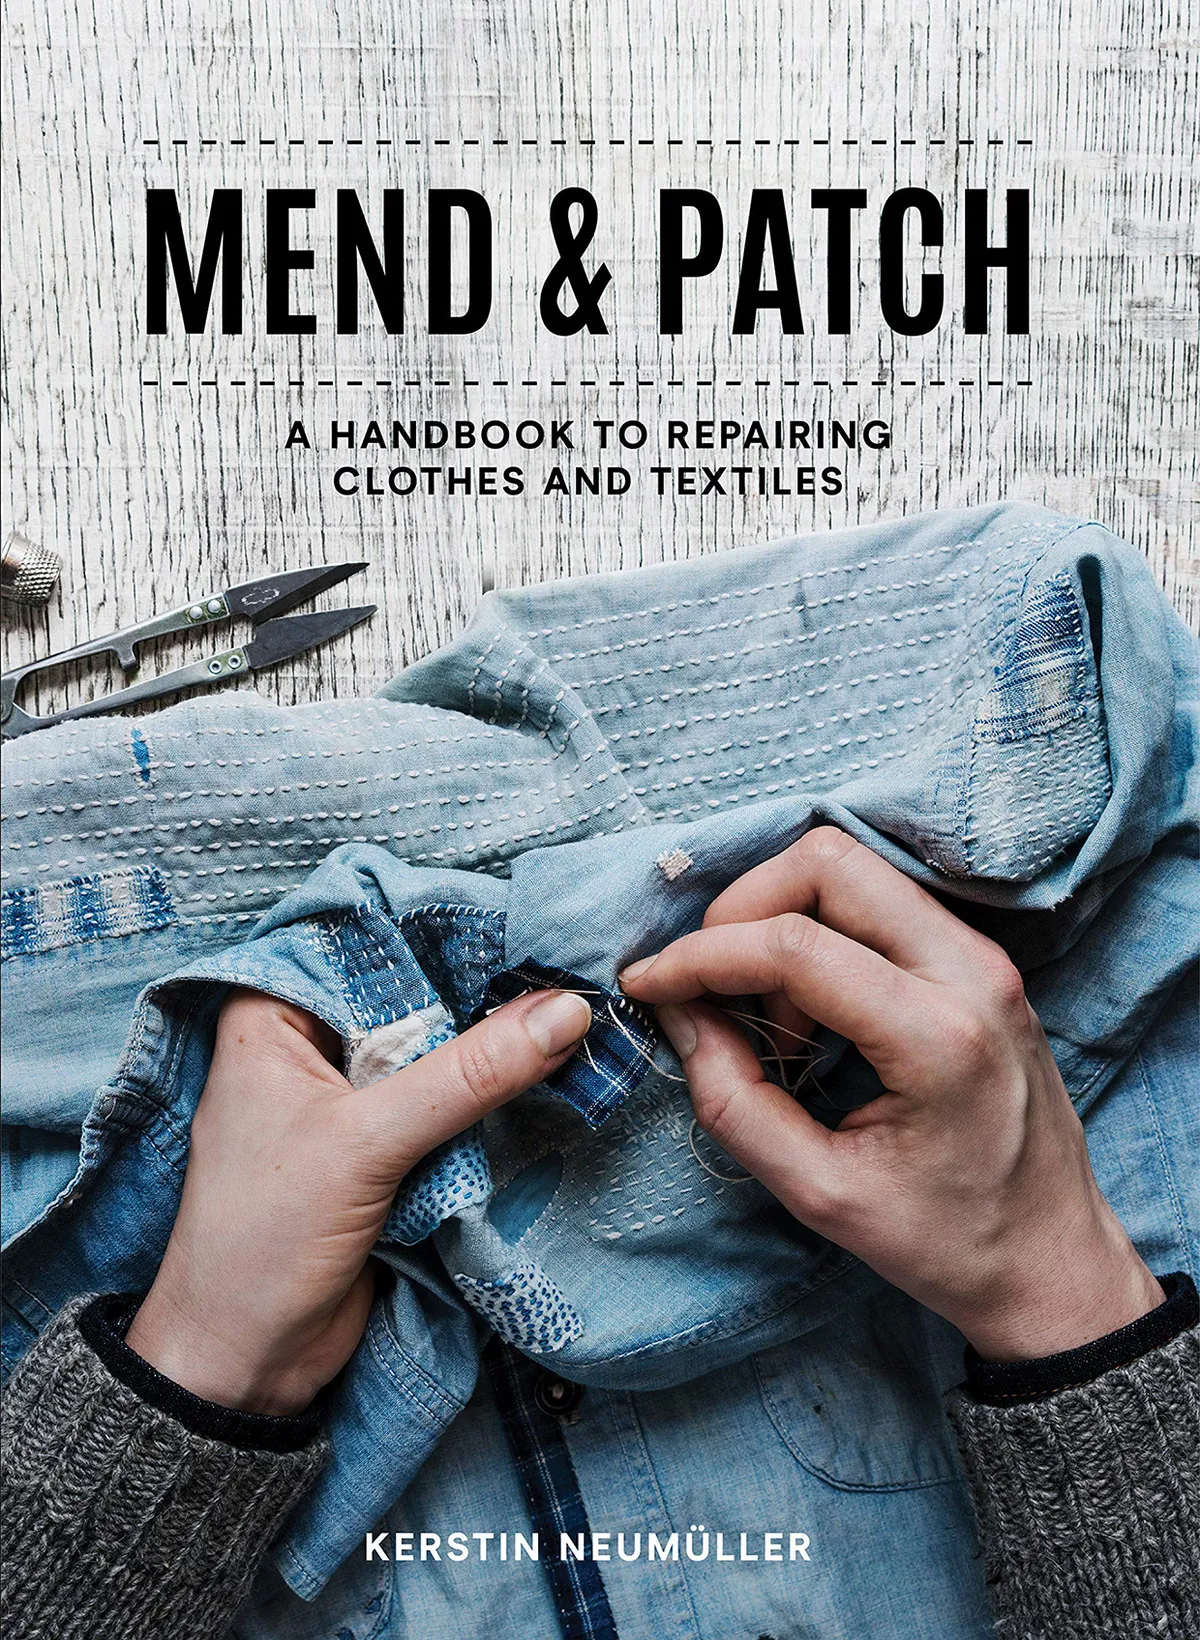 Mend & Patch- A handbook to repairing clothes and textiles